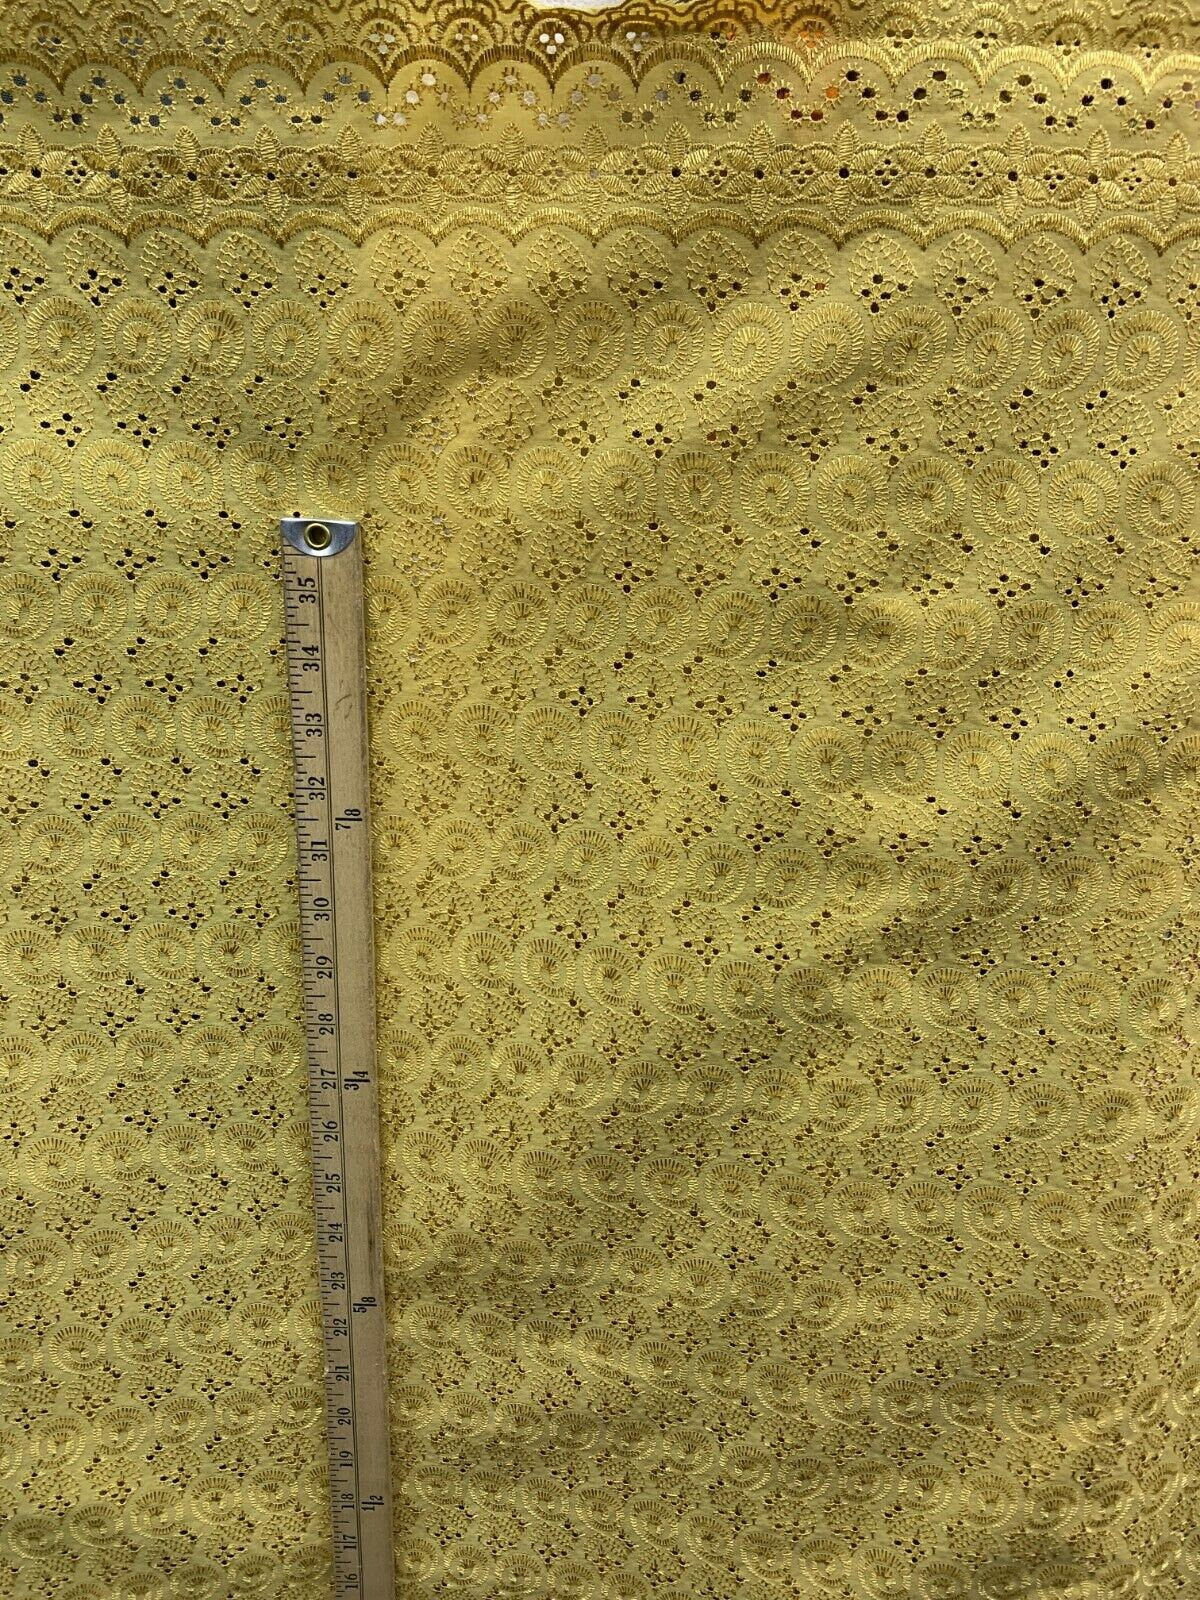 LIGHT GOLD Floral Cotton Eyelet Embroidered Fabric (45 in.) Sold By The Yard